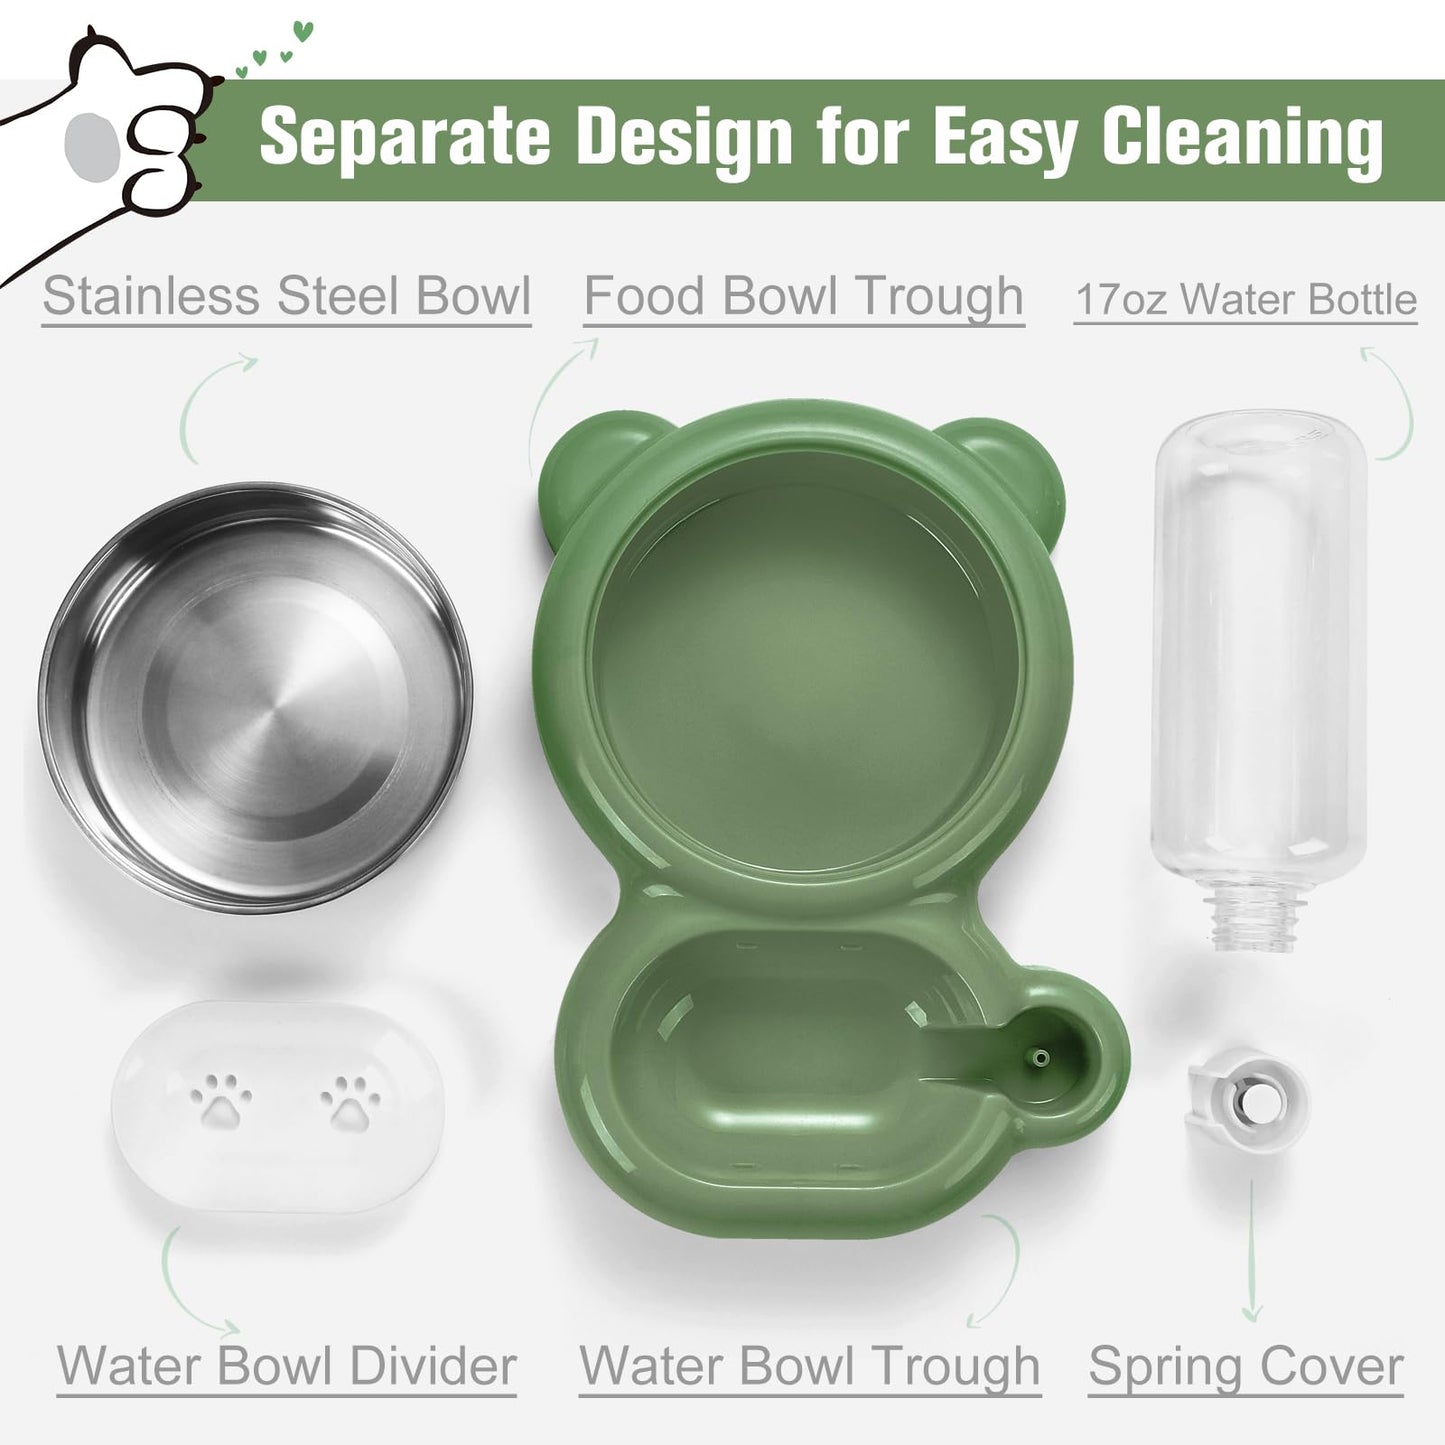 Cat & Dog Bowl Set with Water Dispenser - Green